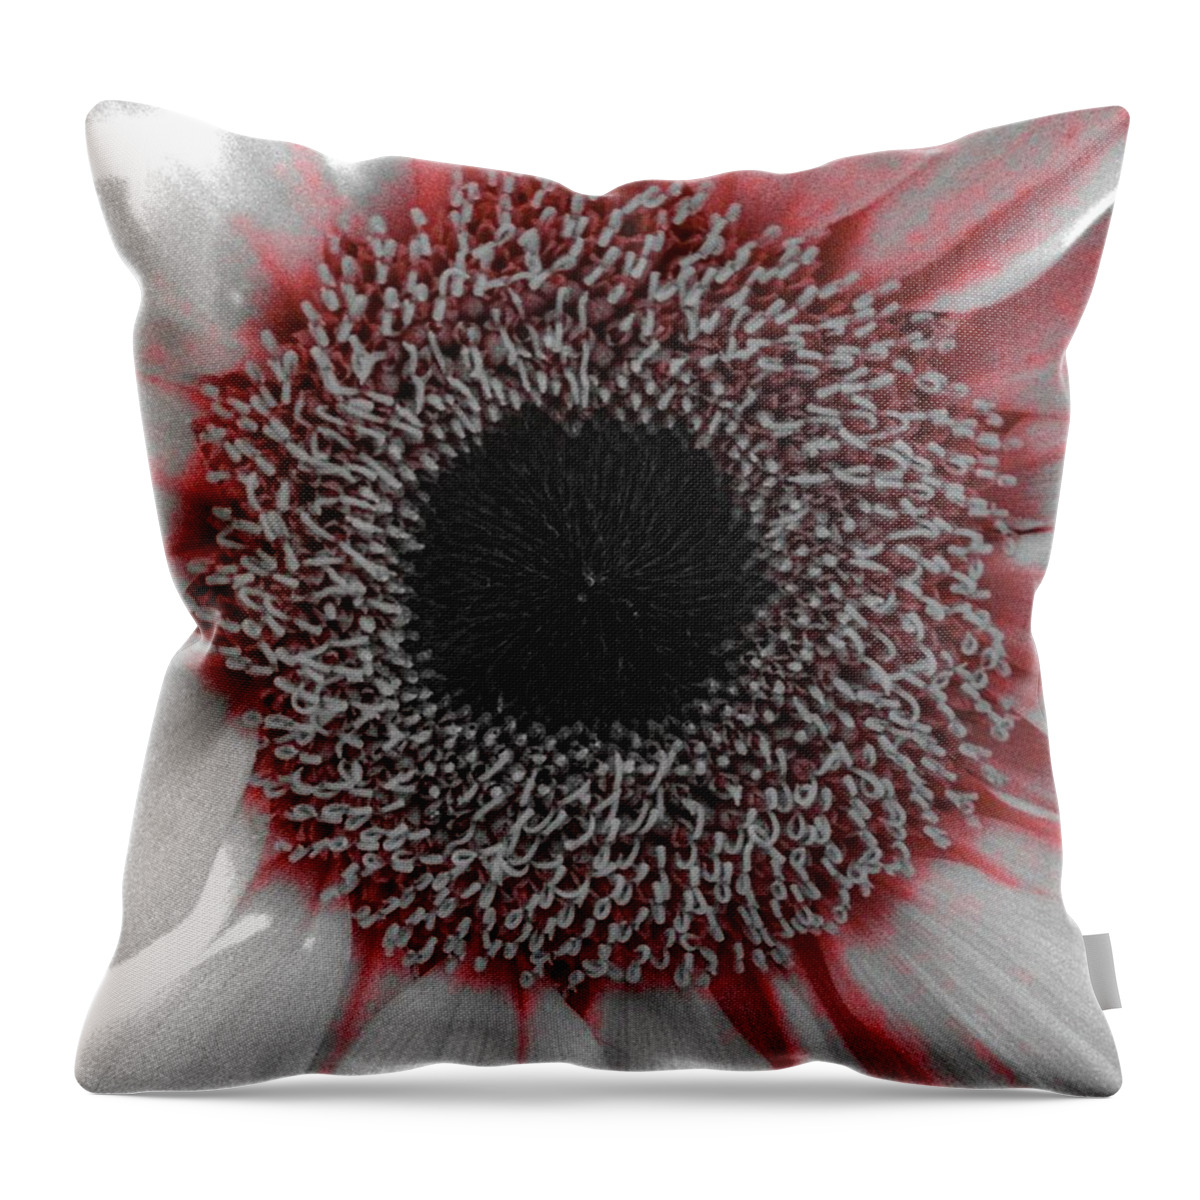 Daisy Throw Pillow featuring the photograph Red Delight by Marian Lonzetta